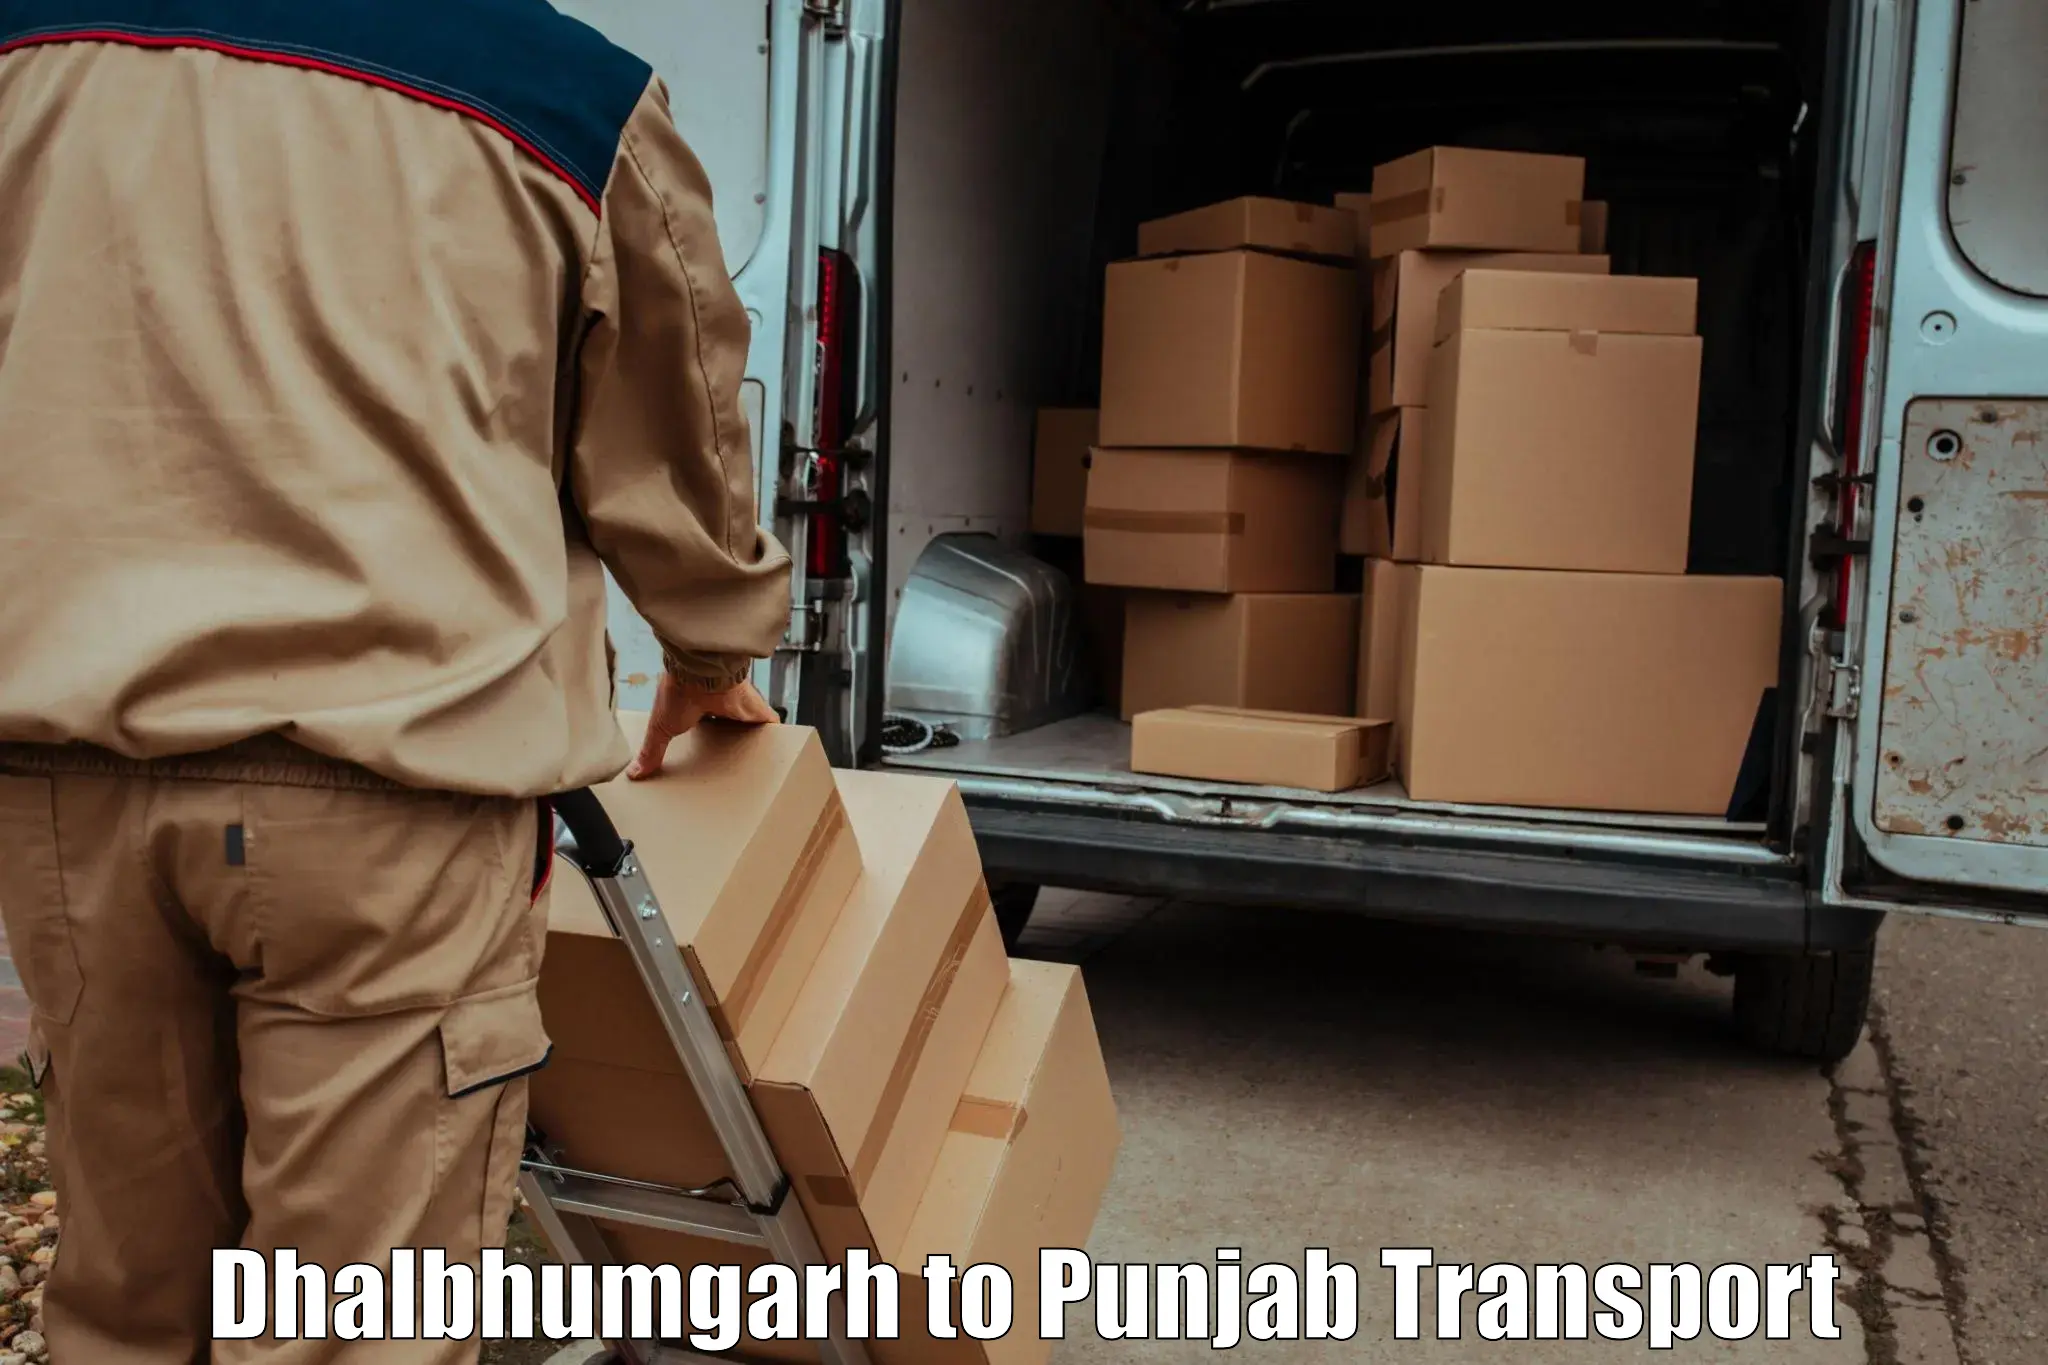 Pick up transport service Dhalbhumgarh to Sultanpur Lodhi